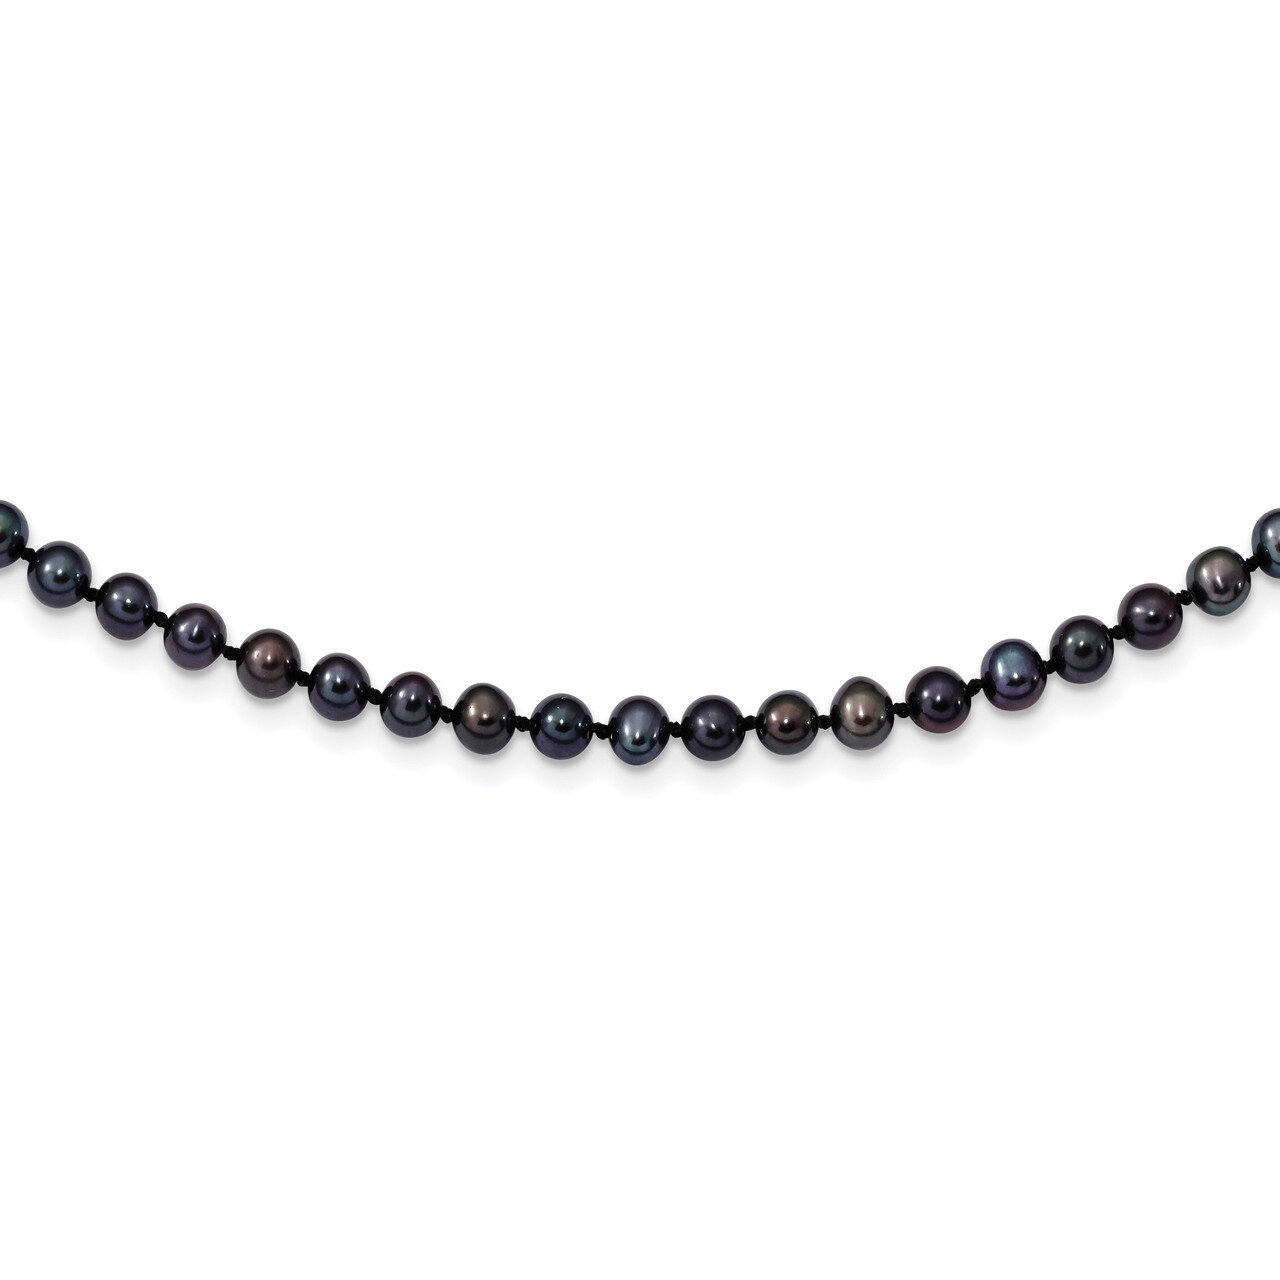 4-5mm Black Cultured Freshwater Pearl Necklace 18 Inch Sterling Silver Rhodium-plated QH5152-18